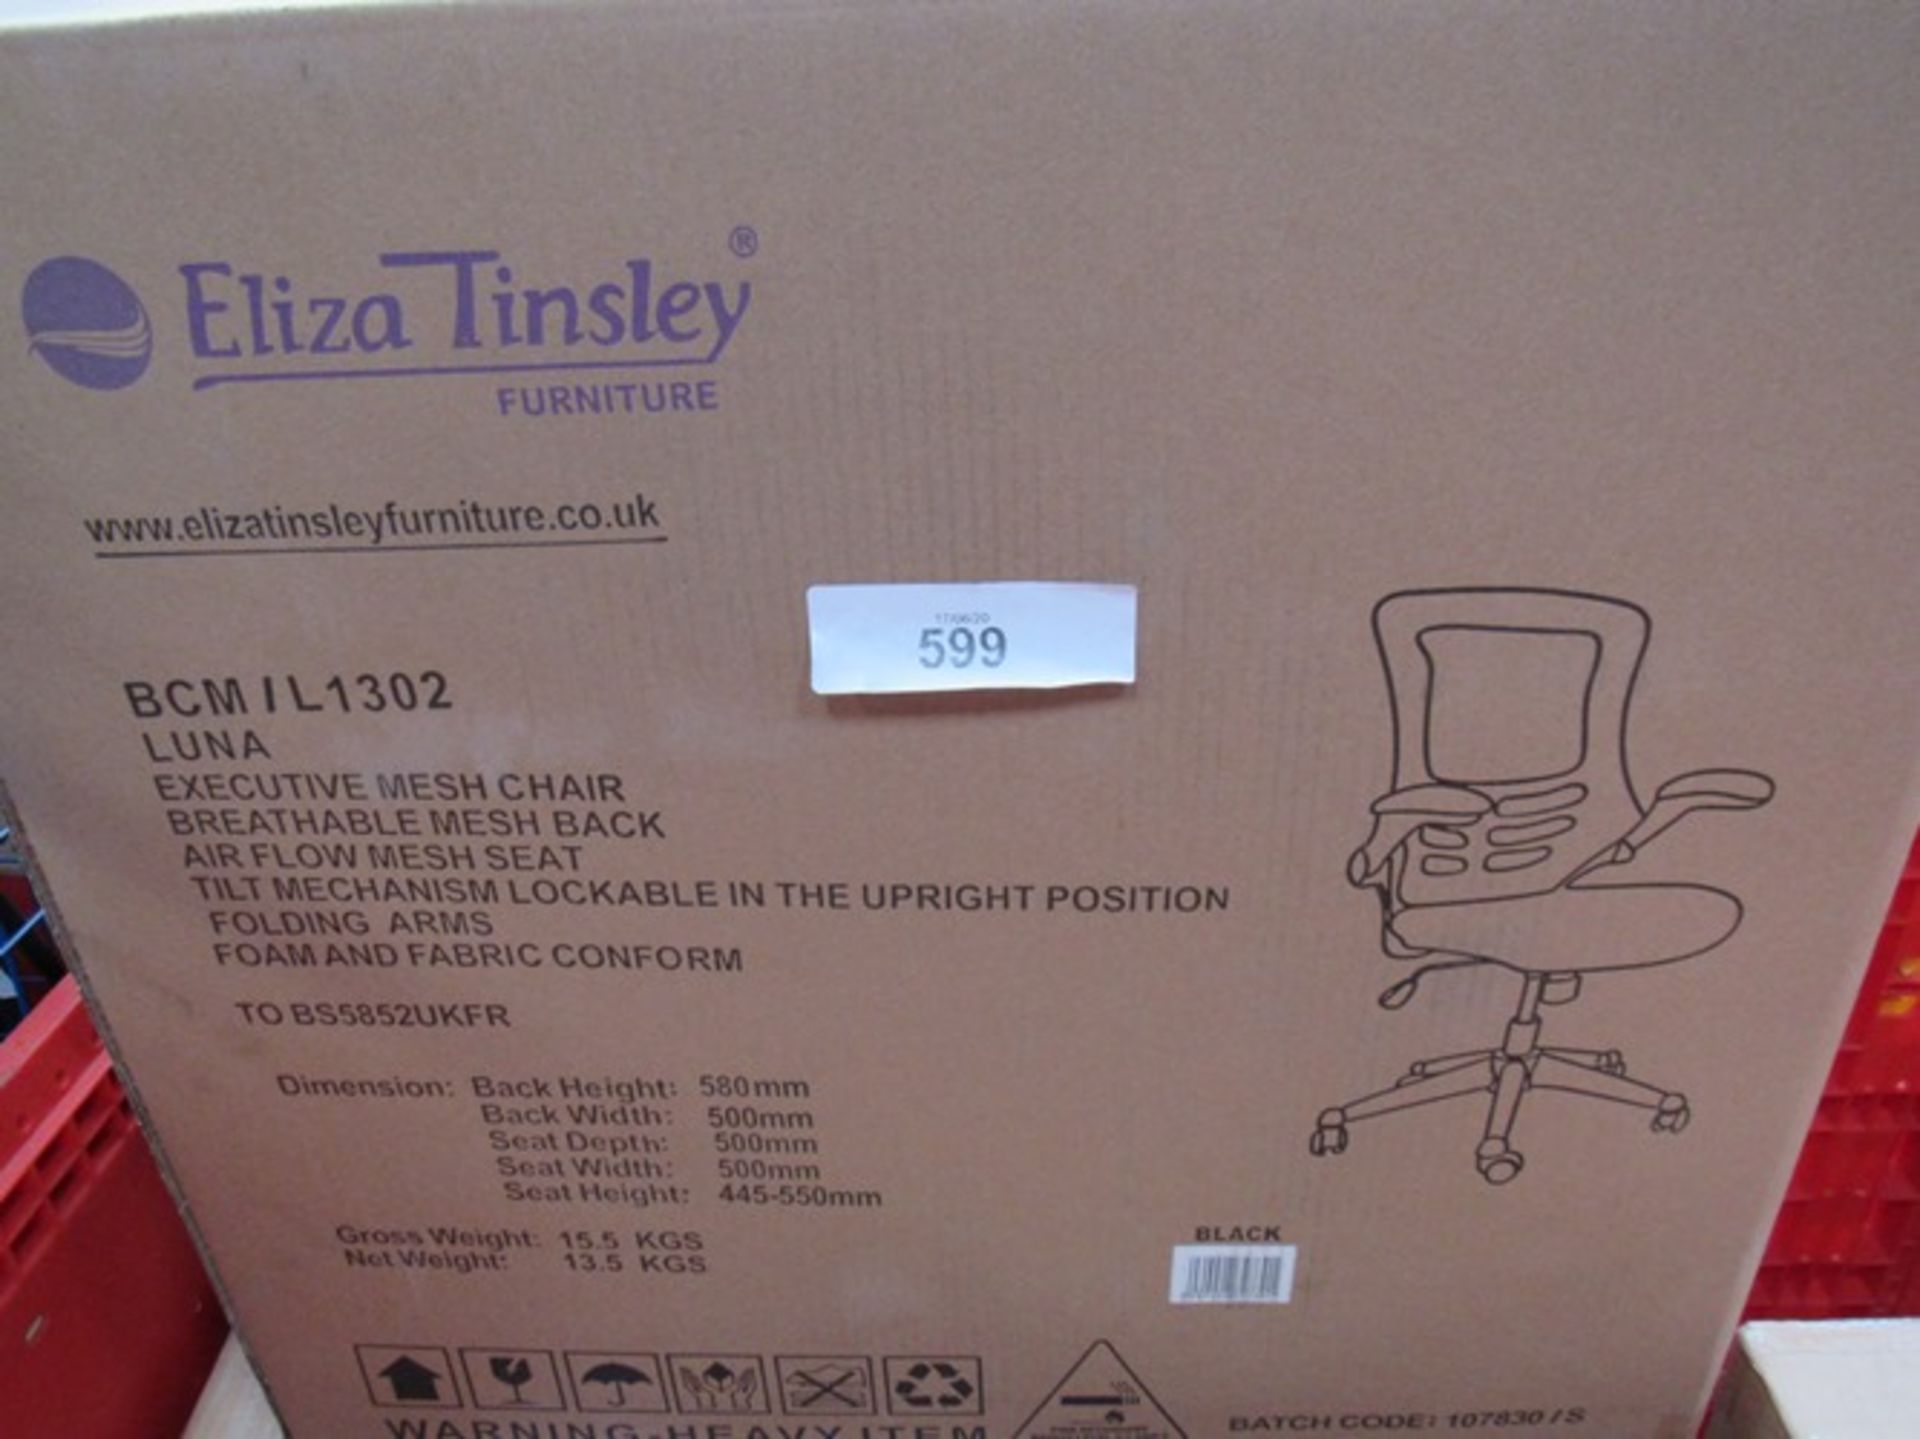 4 x Eliza Tinsley computer armchairs including 2 x executive mesh chairs with breathable mesh back